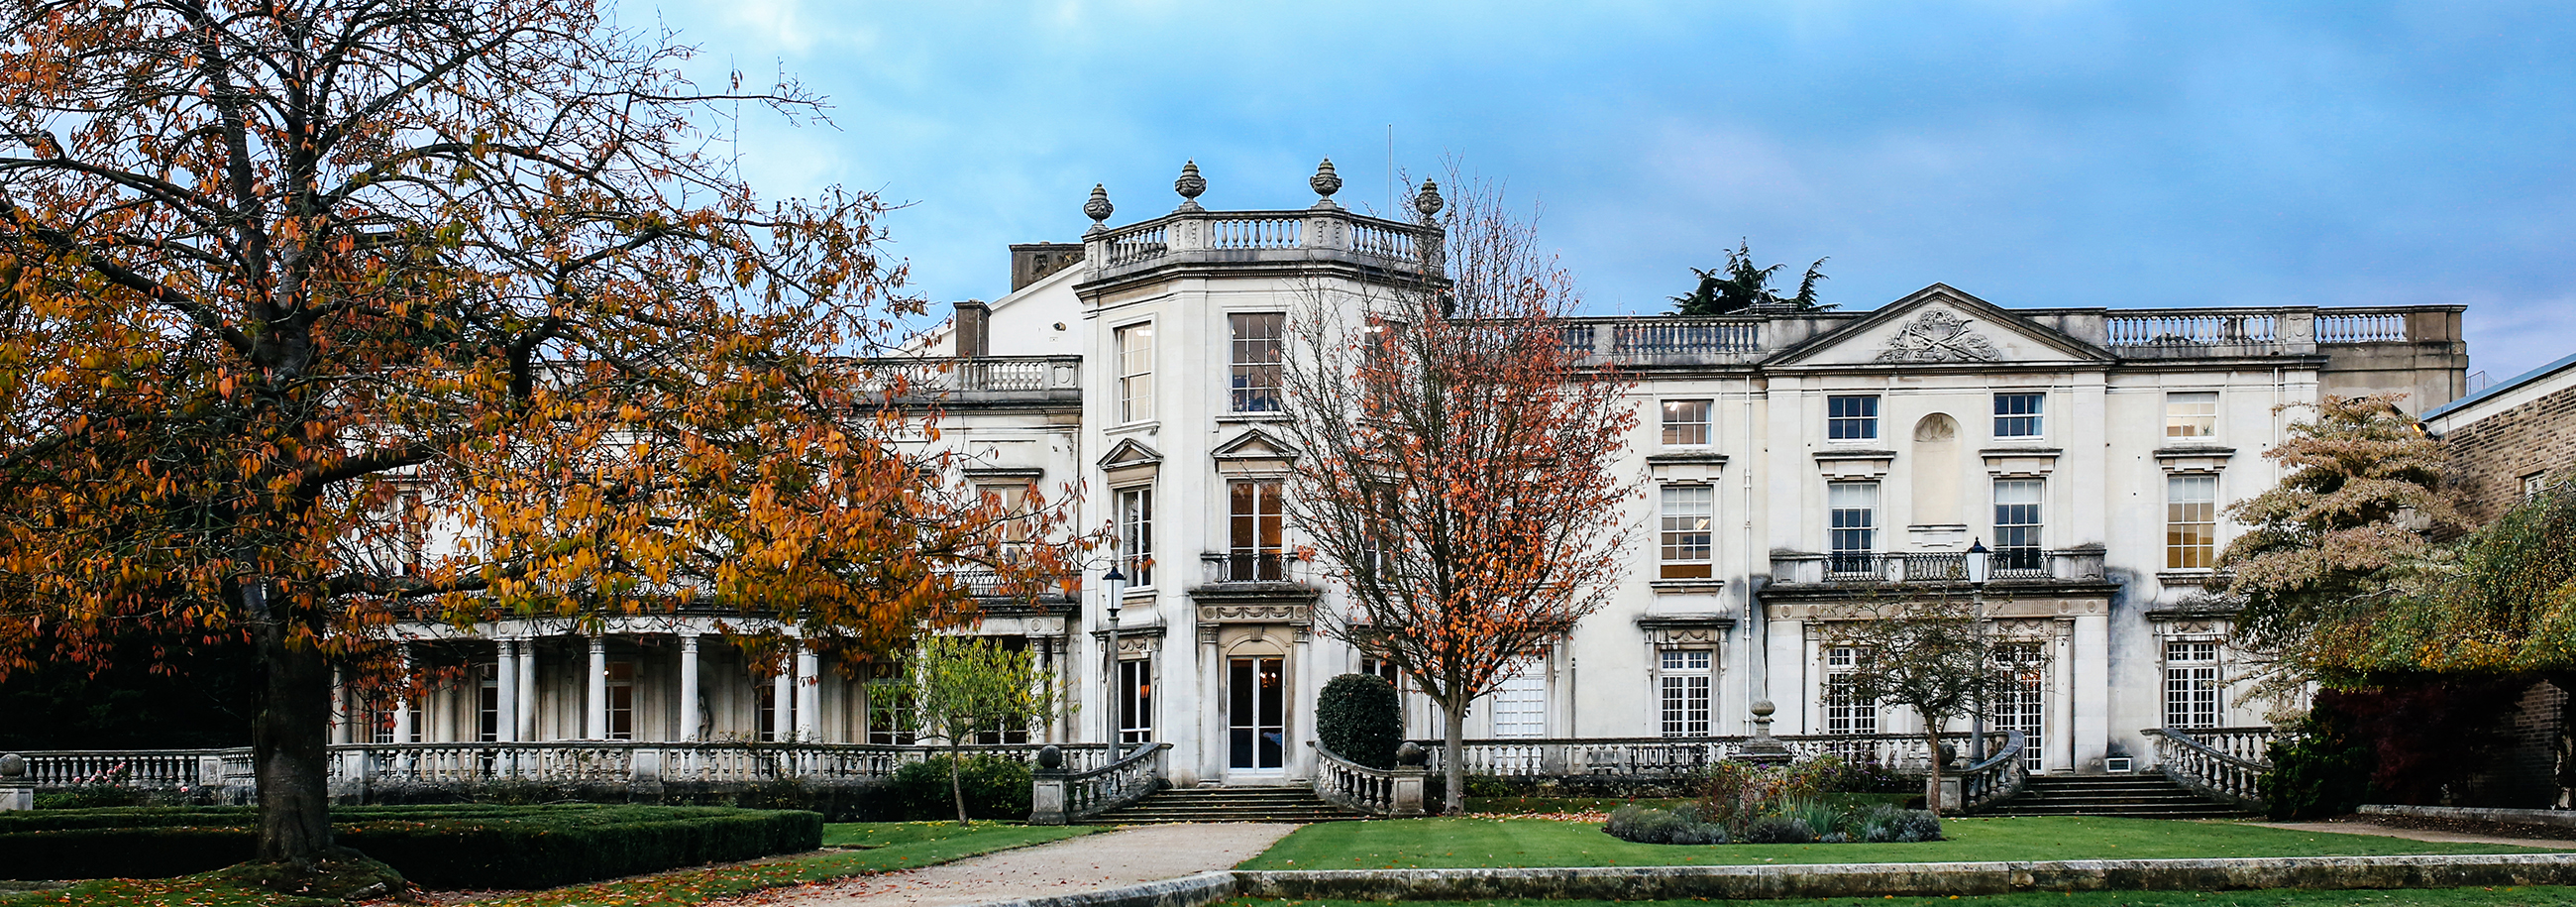 Image - Roehampton ranked top 10 in London in Times Good University Guide 2021